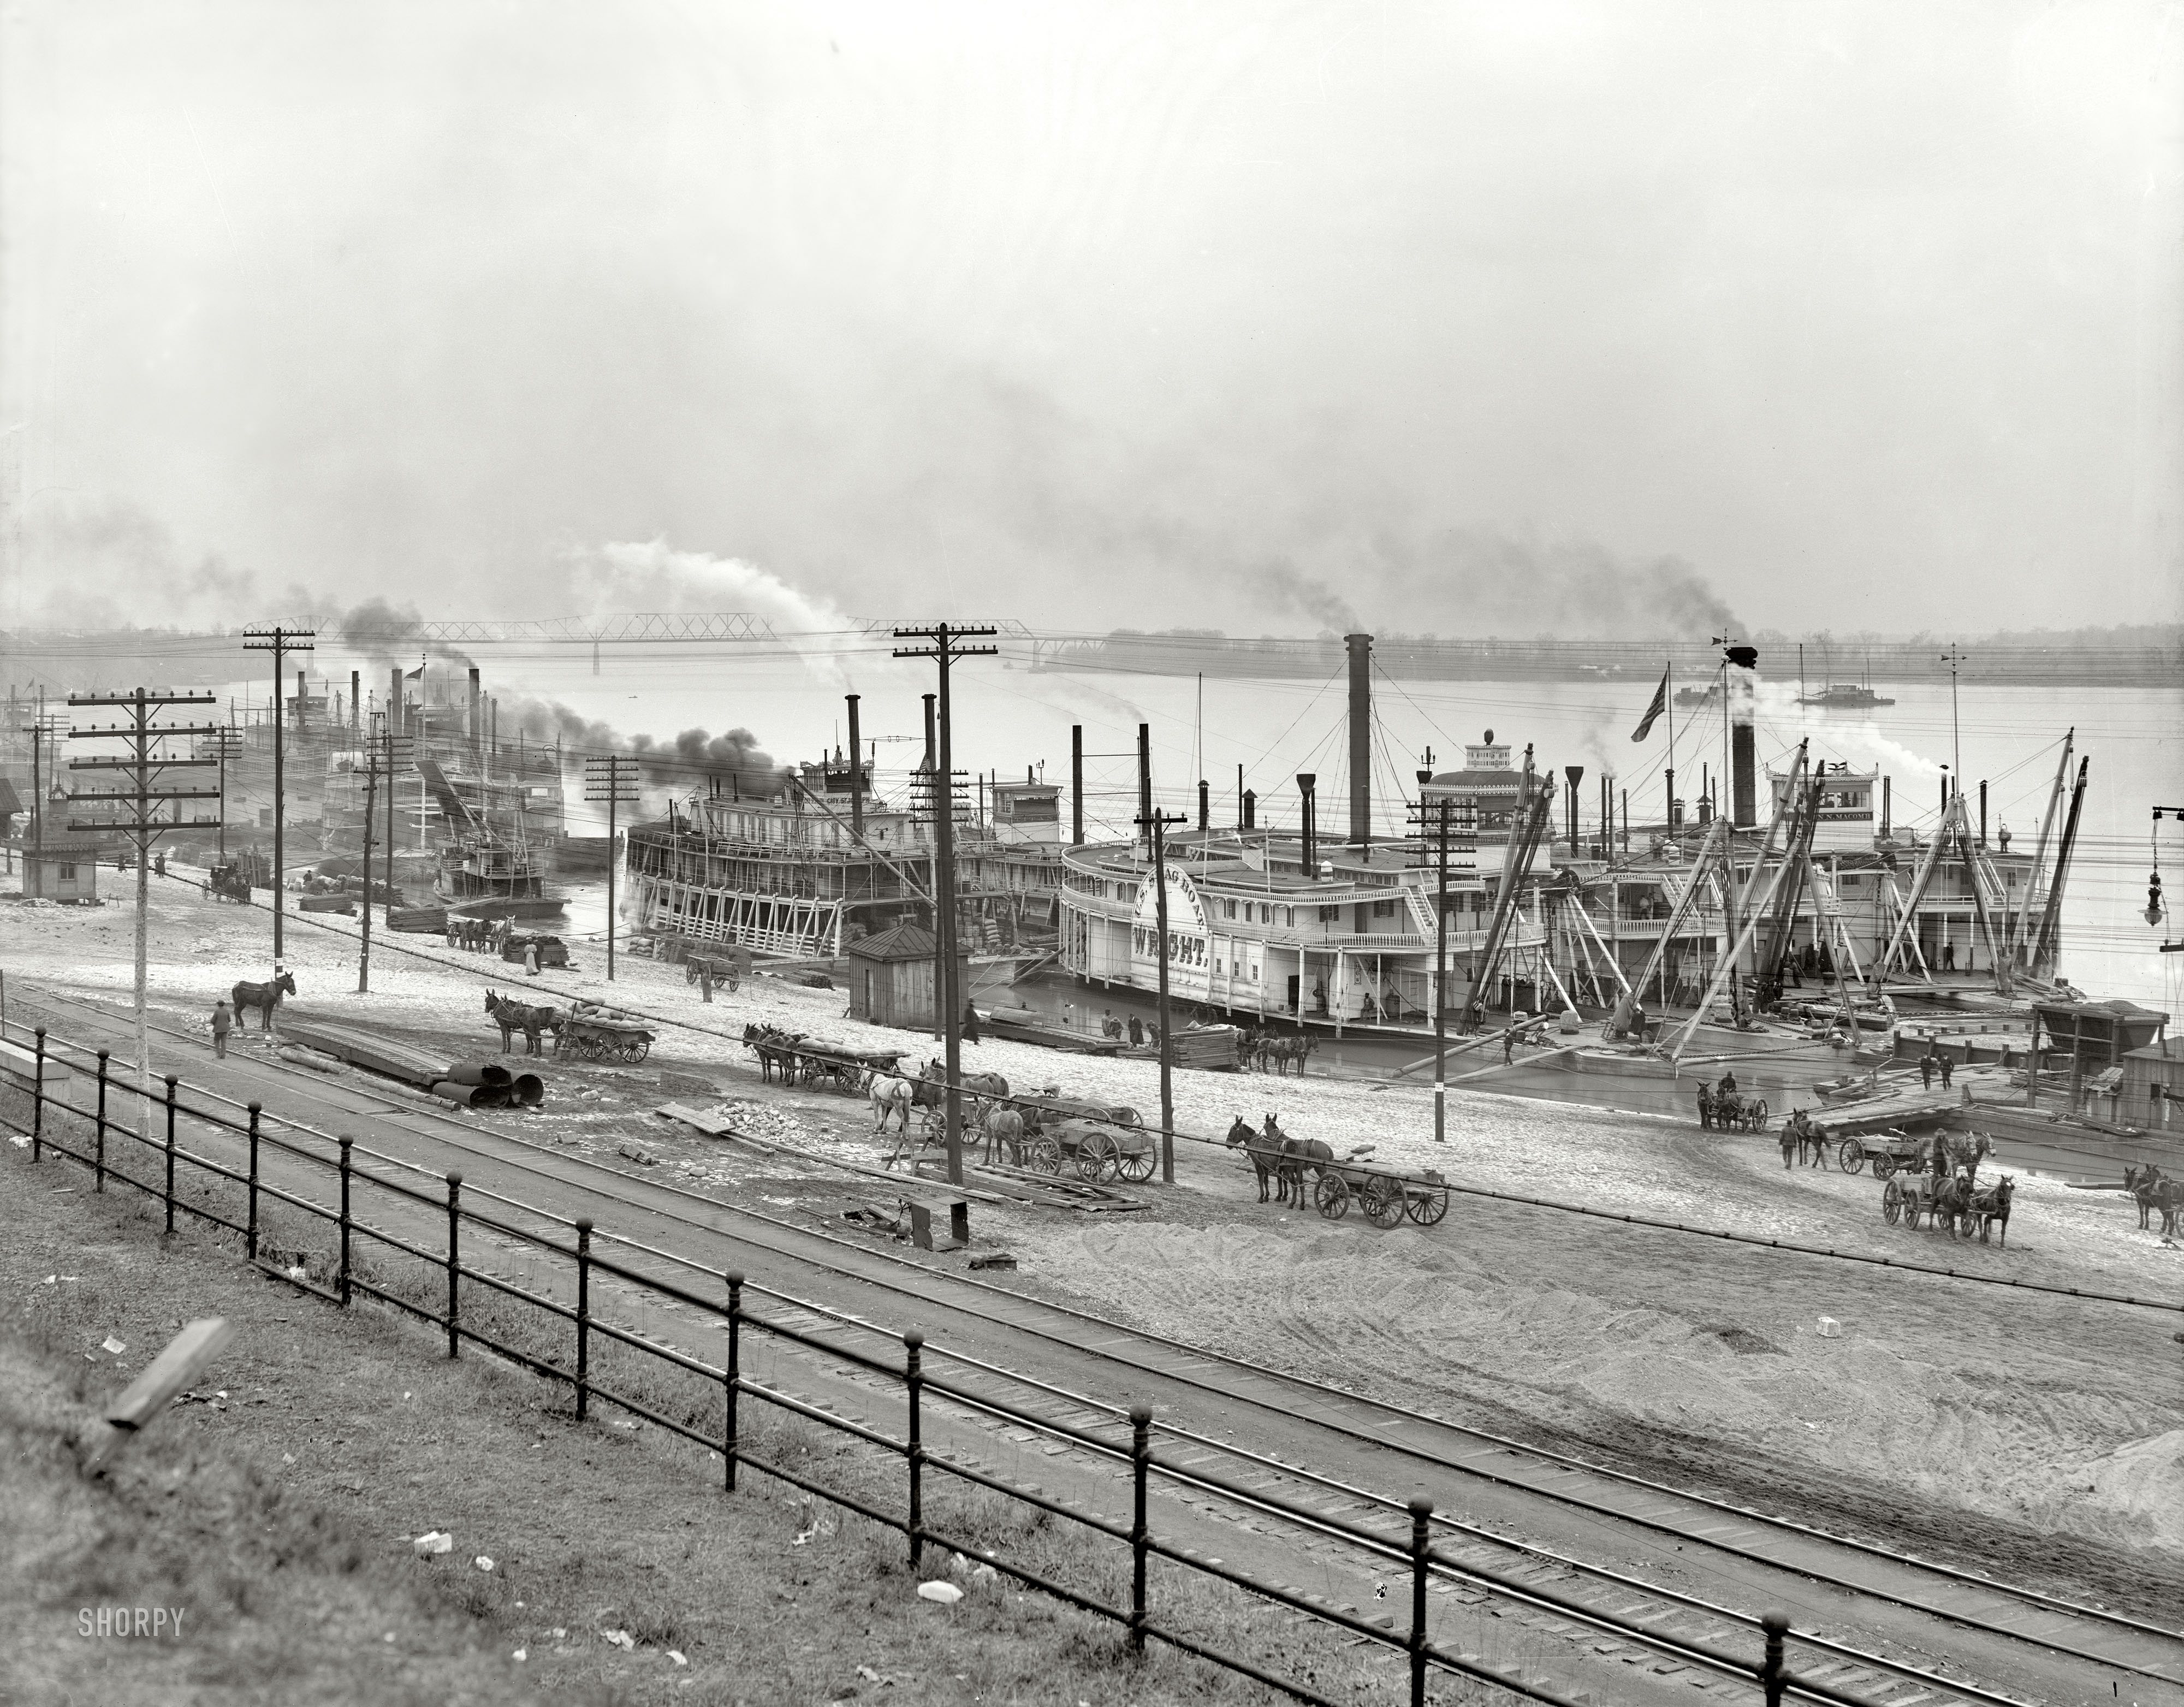 Memphis, Tennessee, circa 1906. "Mississippi River levee from the bluff." 8x10 inch dry plate glass negative, Detroit Publishing Company. View full size.